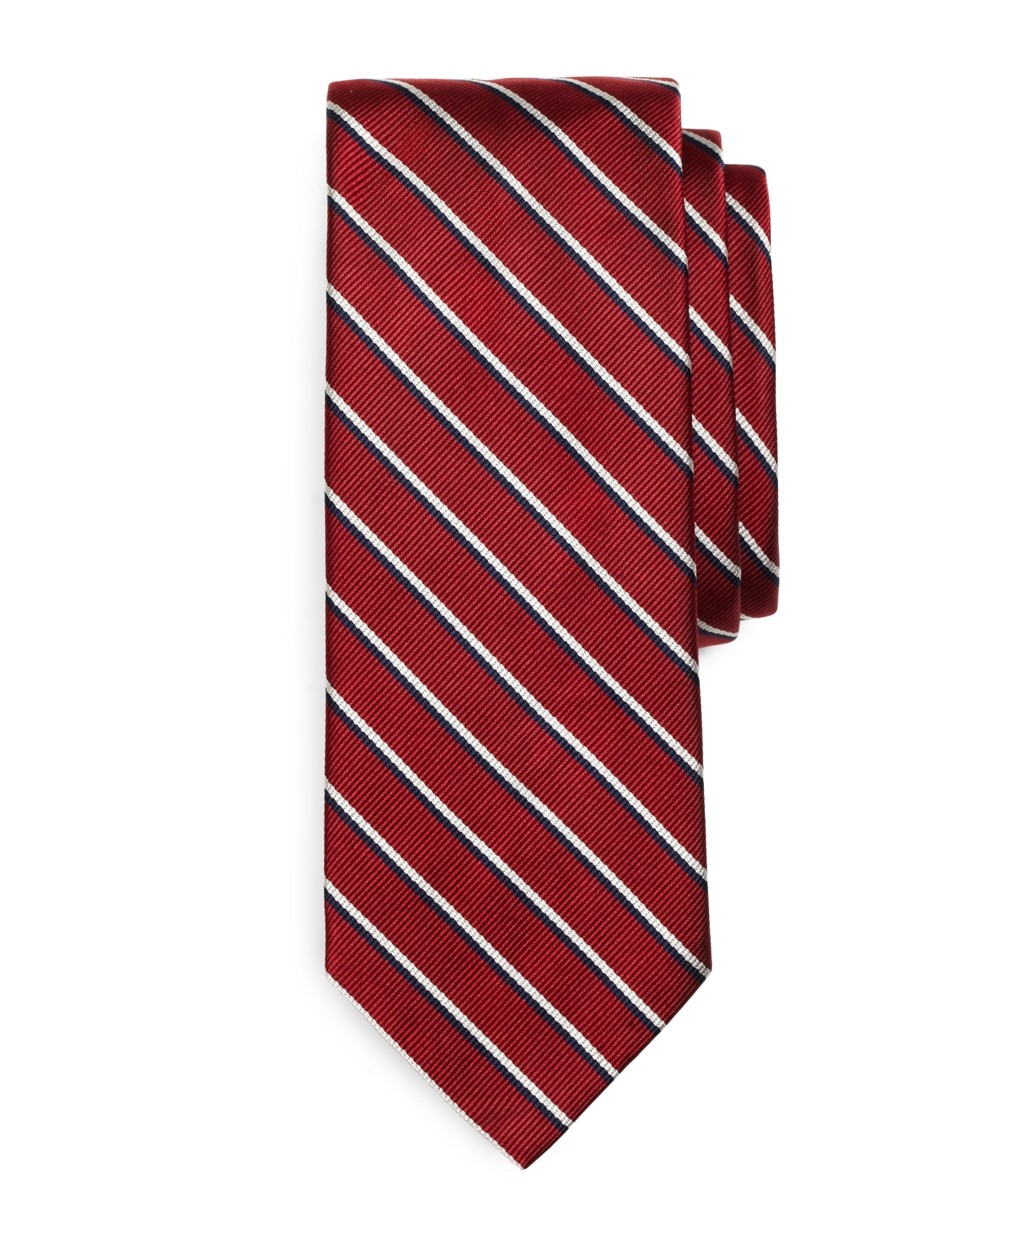 A Study in Stripes: Regimental and Repp Ties | Page 4 | Styleforum